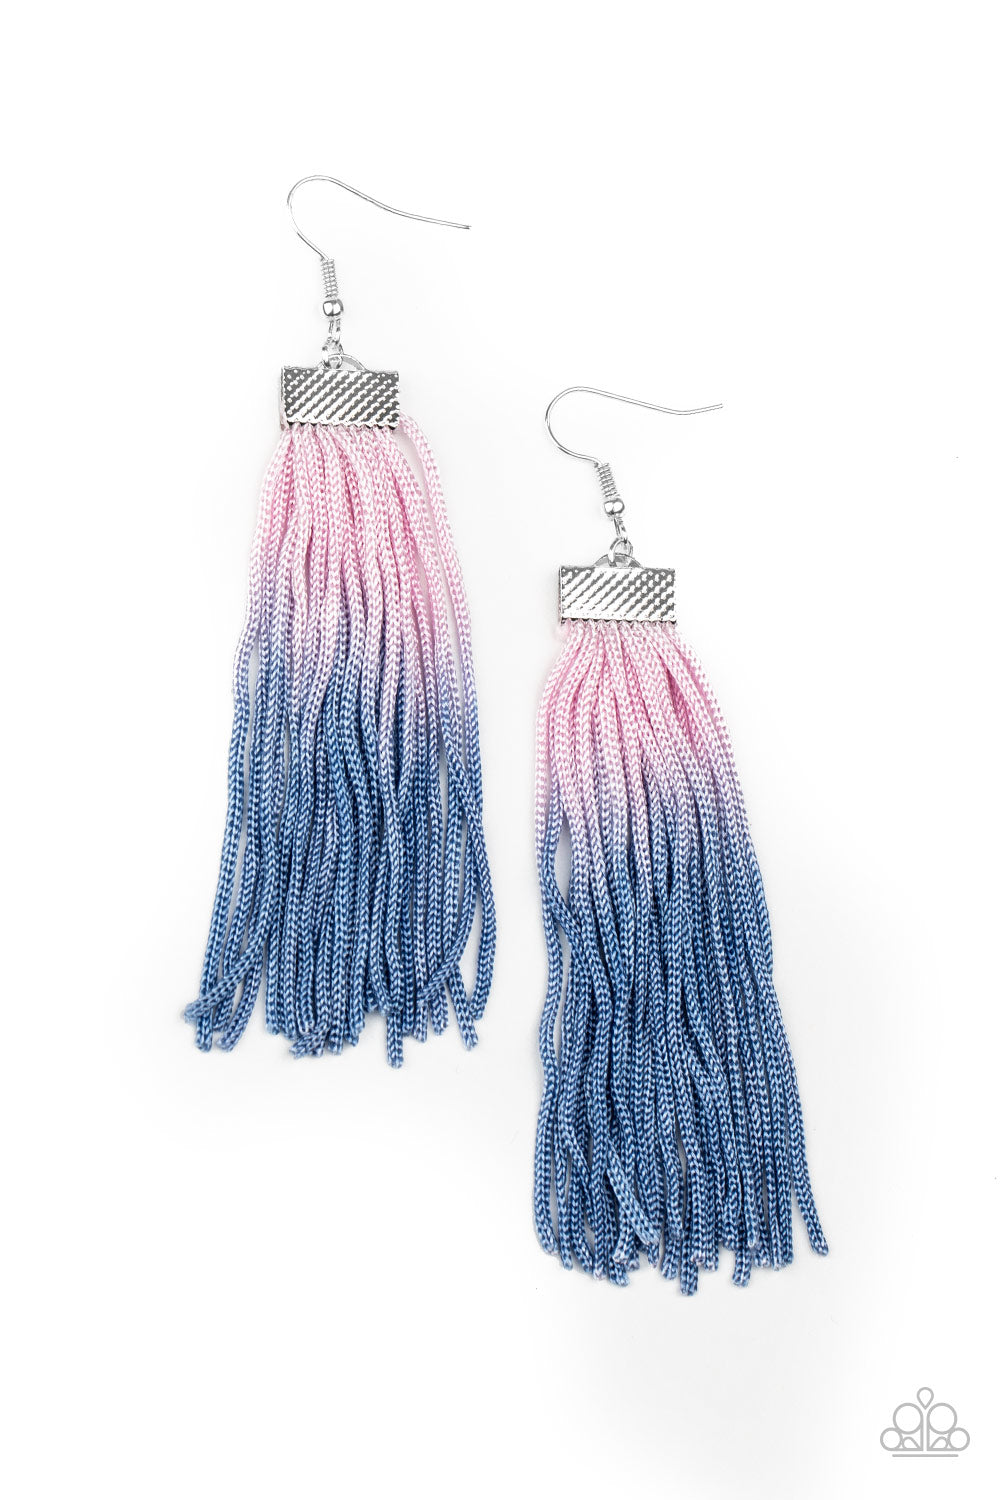 Dual Immersion - Pink & Blue Ombre Earrings - Princess Glam Shop